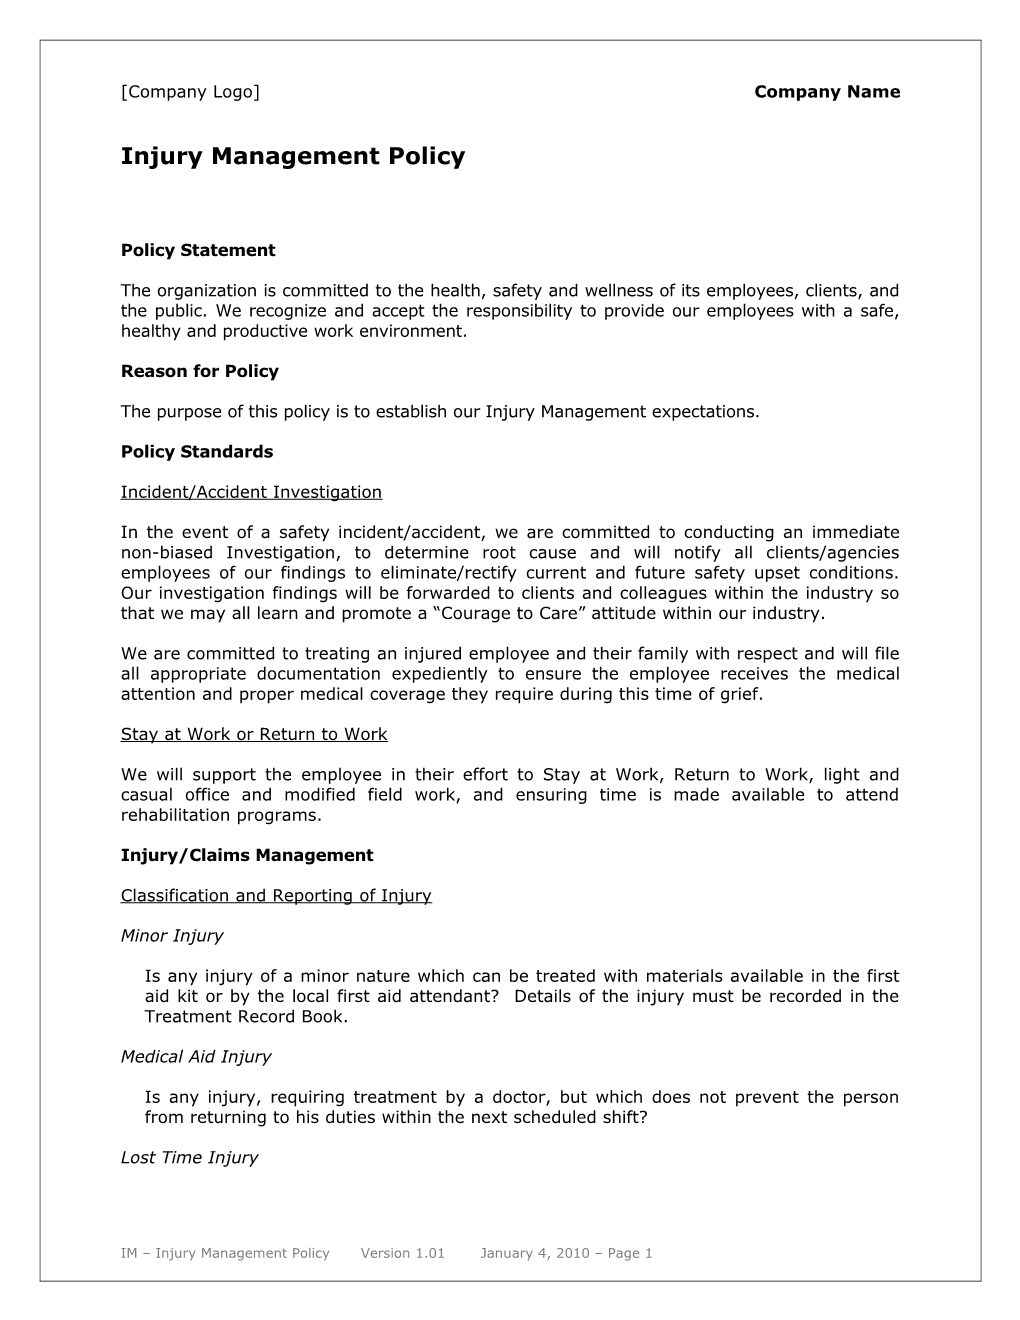 Injury Management Policy